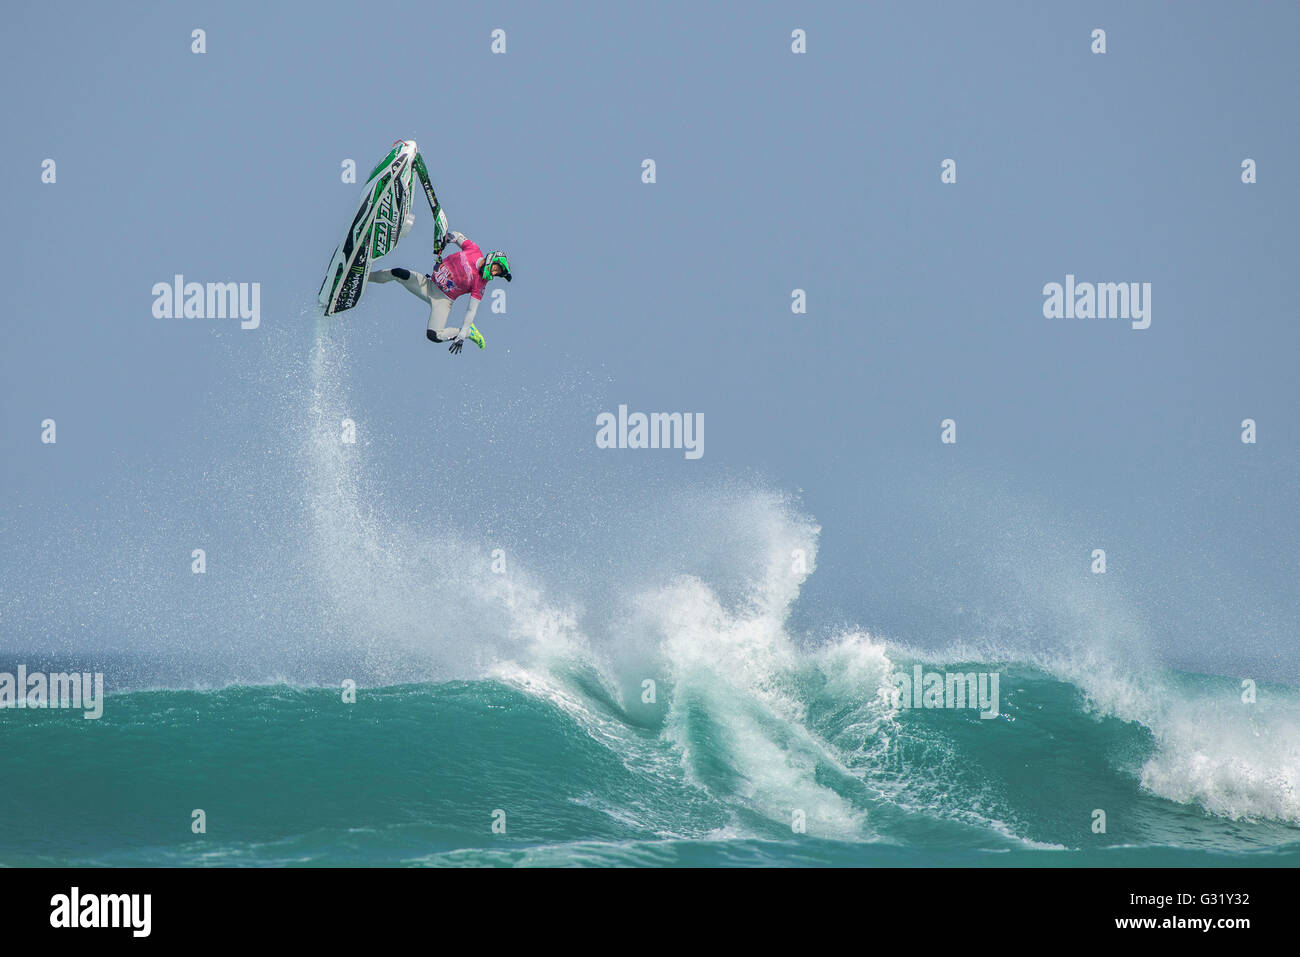 Fistral, Newquay, Cornwall. 6th June, 2016.  Stunning action from Abraham Hochstrasse from Germany as he performs a spectacular stunt on his Jet-ski at the IFWA World Freeride Championships.  Photographer: Gordon Scammell/Alamy Live News. Stock Photo